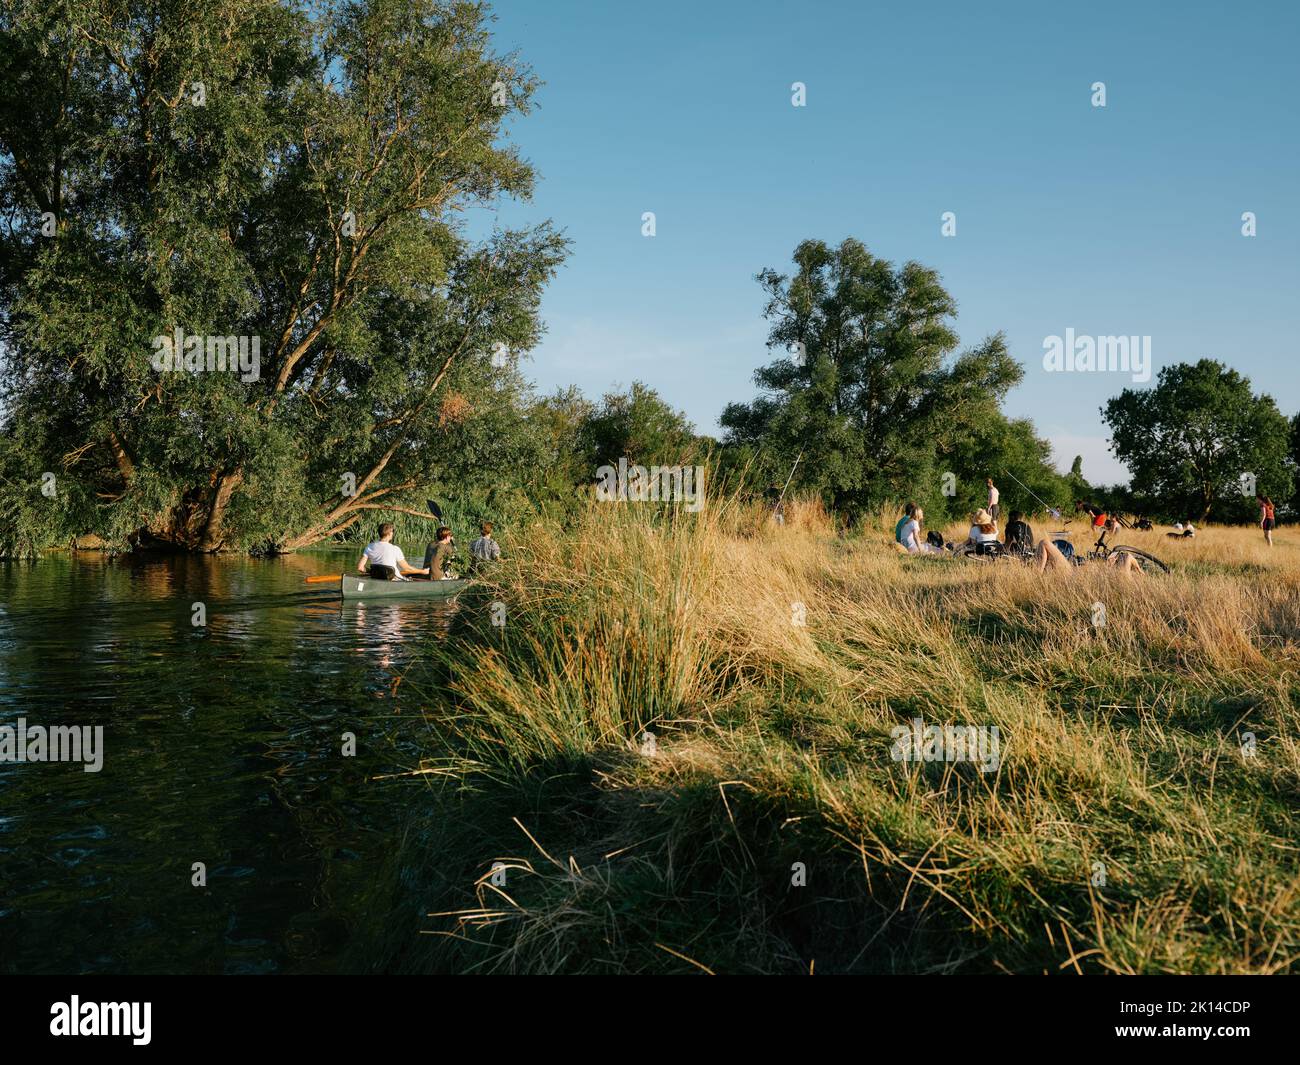 Summer life on Grantchester Meadows on the River Cam in Cambridge Cambridgeshire England UK - summertime countryside people Stock Photo